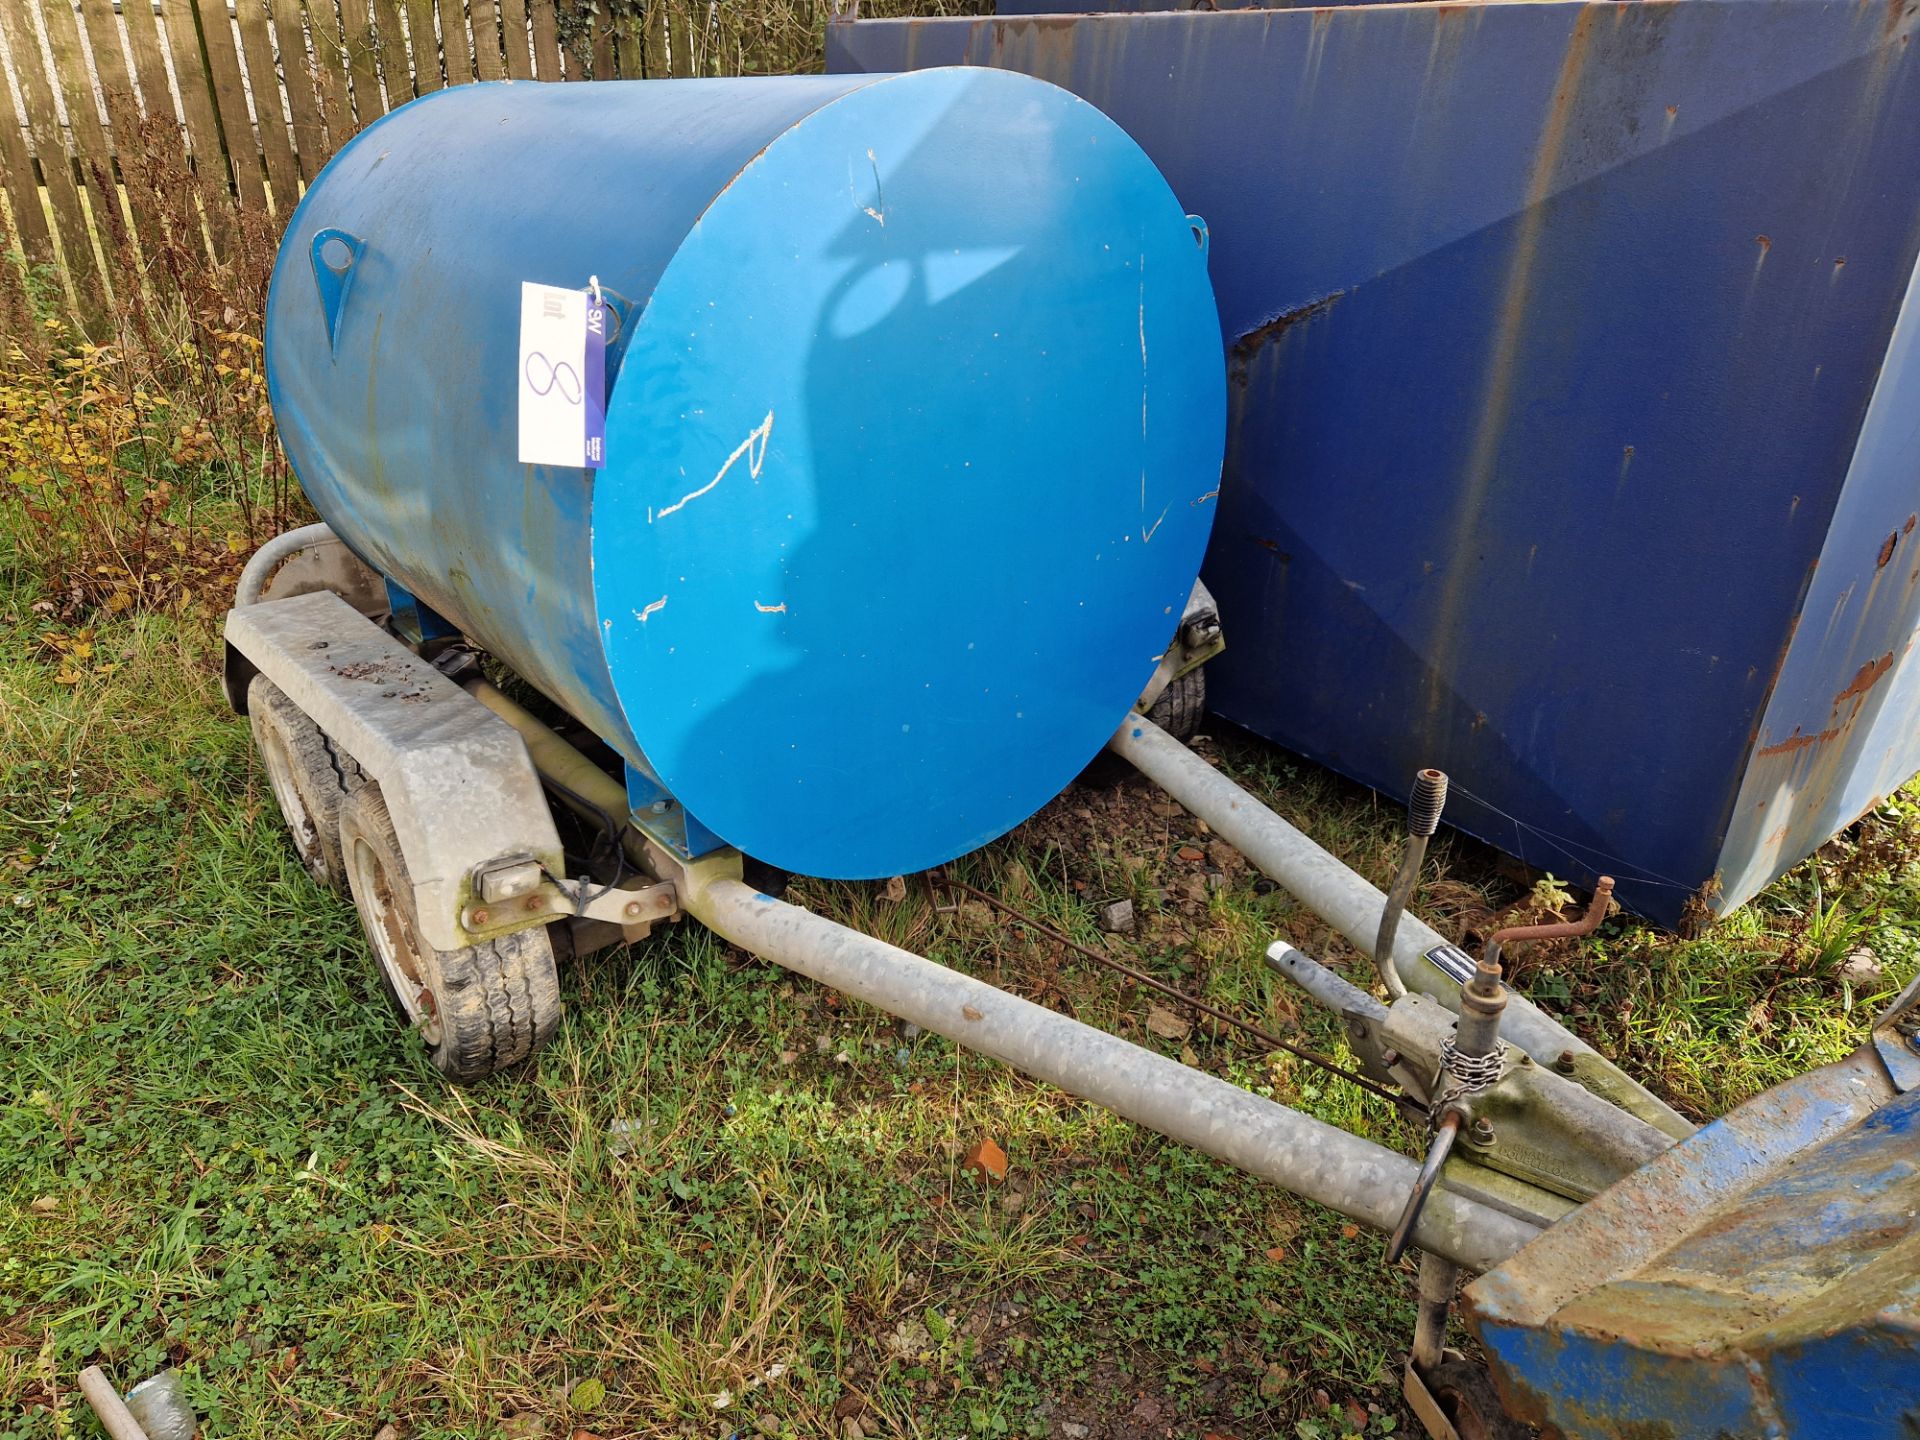 Fuel Proof 1000L Twin Axle Bowser Trailer, YoM 2009, Serial No. 7356 Please read the following